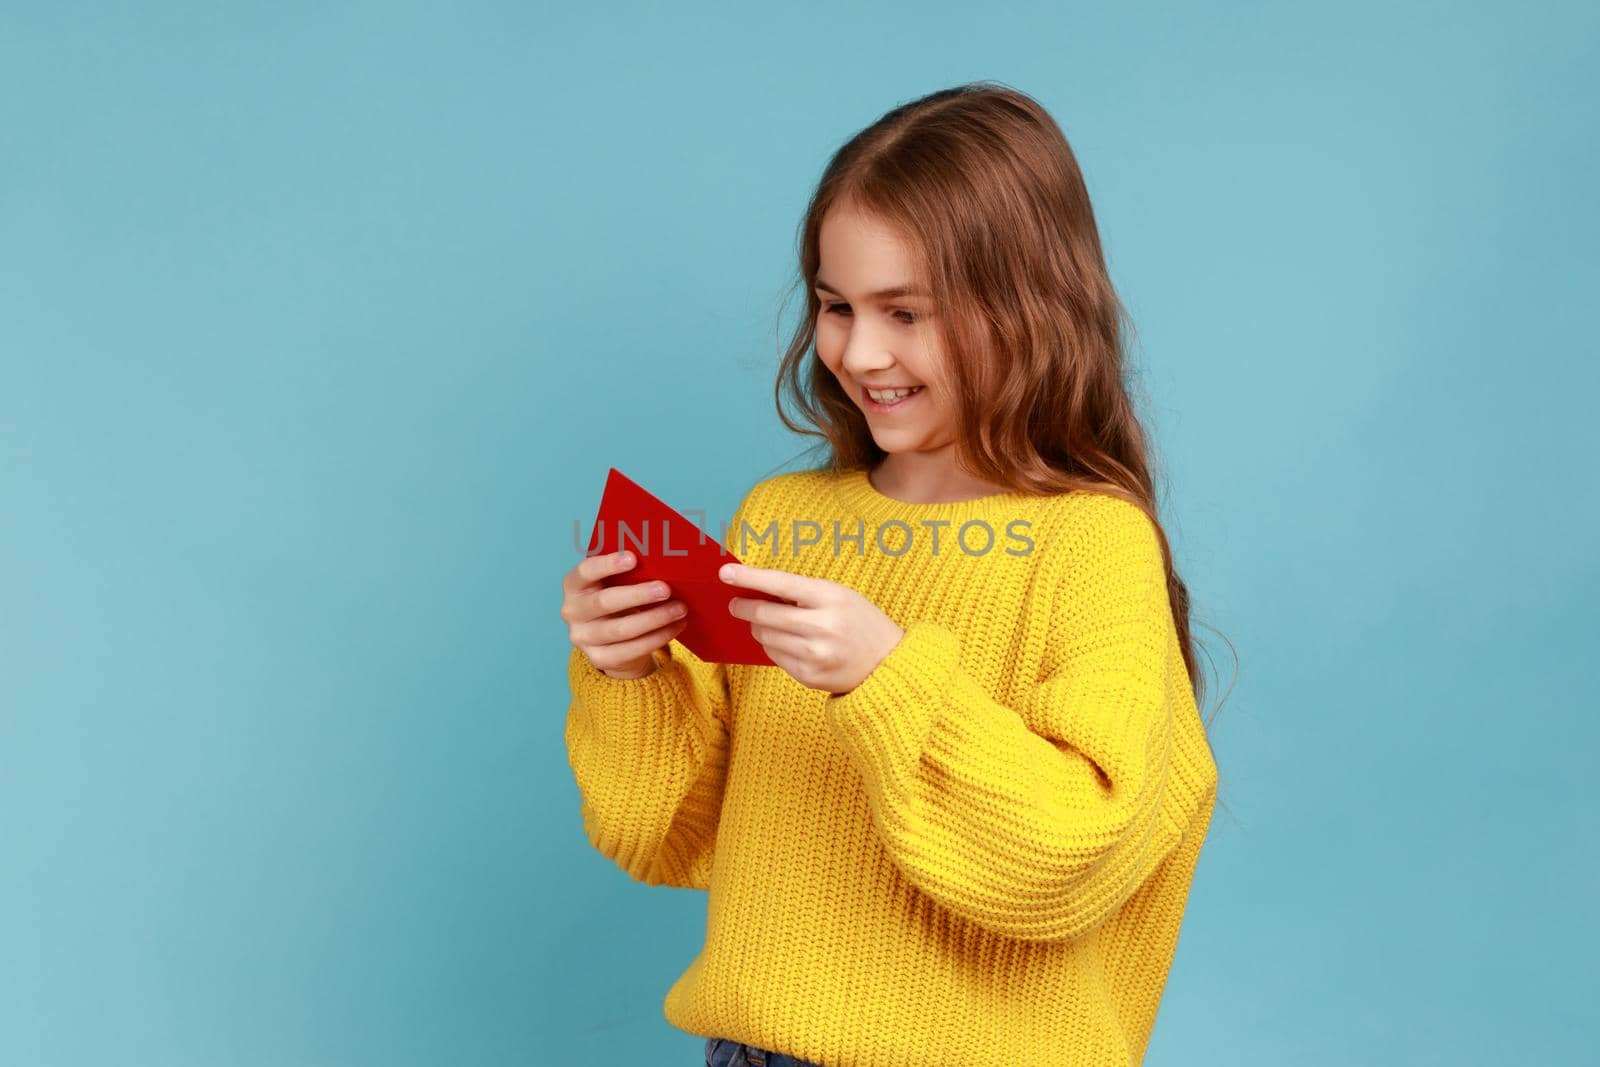 Portrait of little girl holds red envelope in hands, reads letter from classmate with charming smile, wearing yellow casual style sweater. Indoor studio shot isolated on blue background.